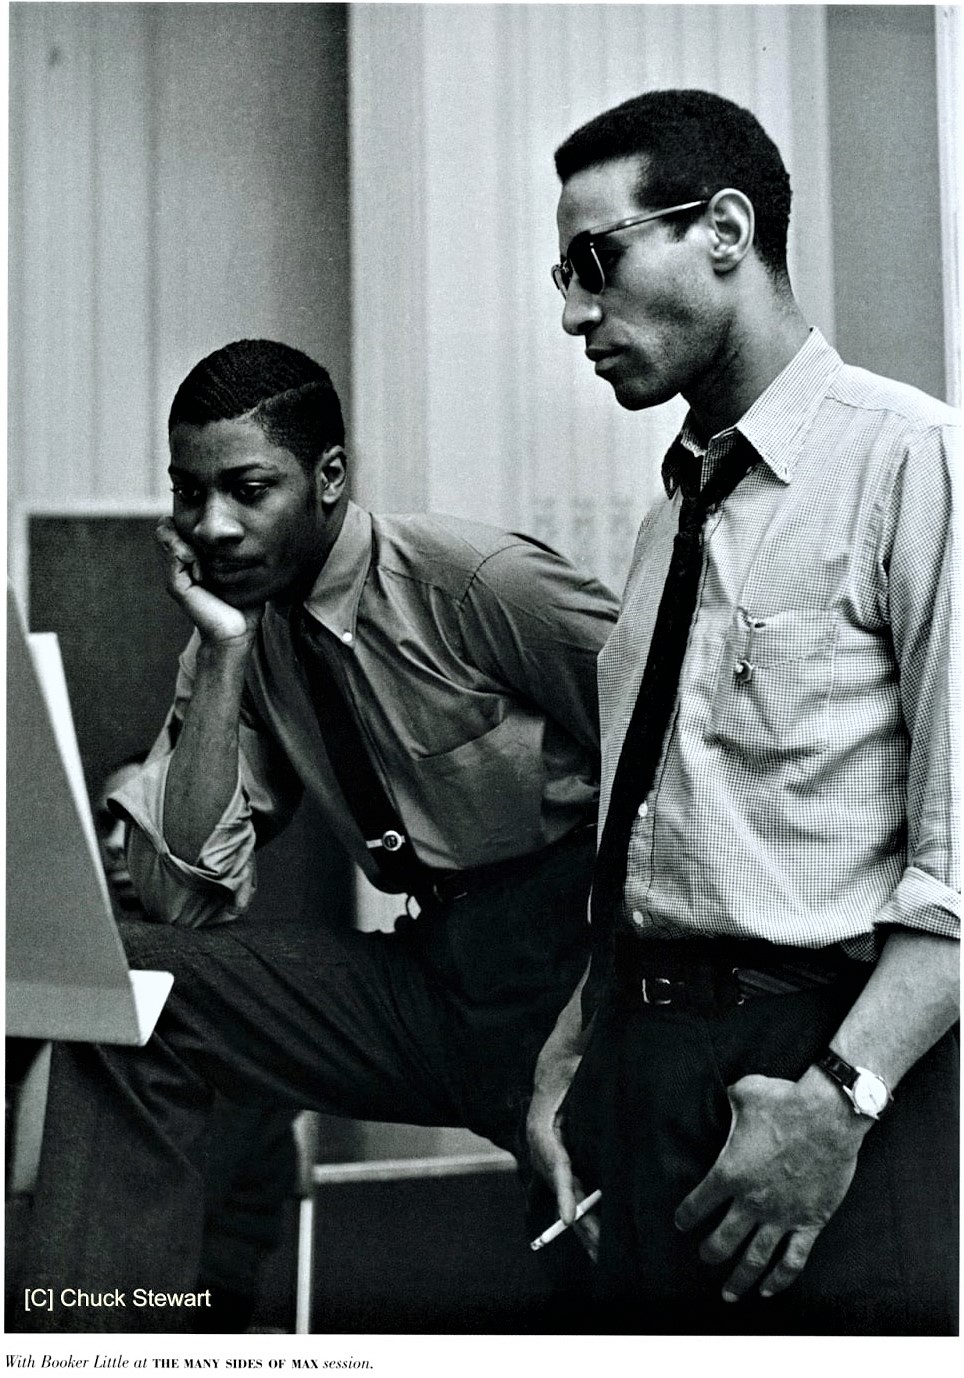  Booker Little and Max Roach 